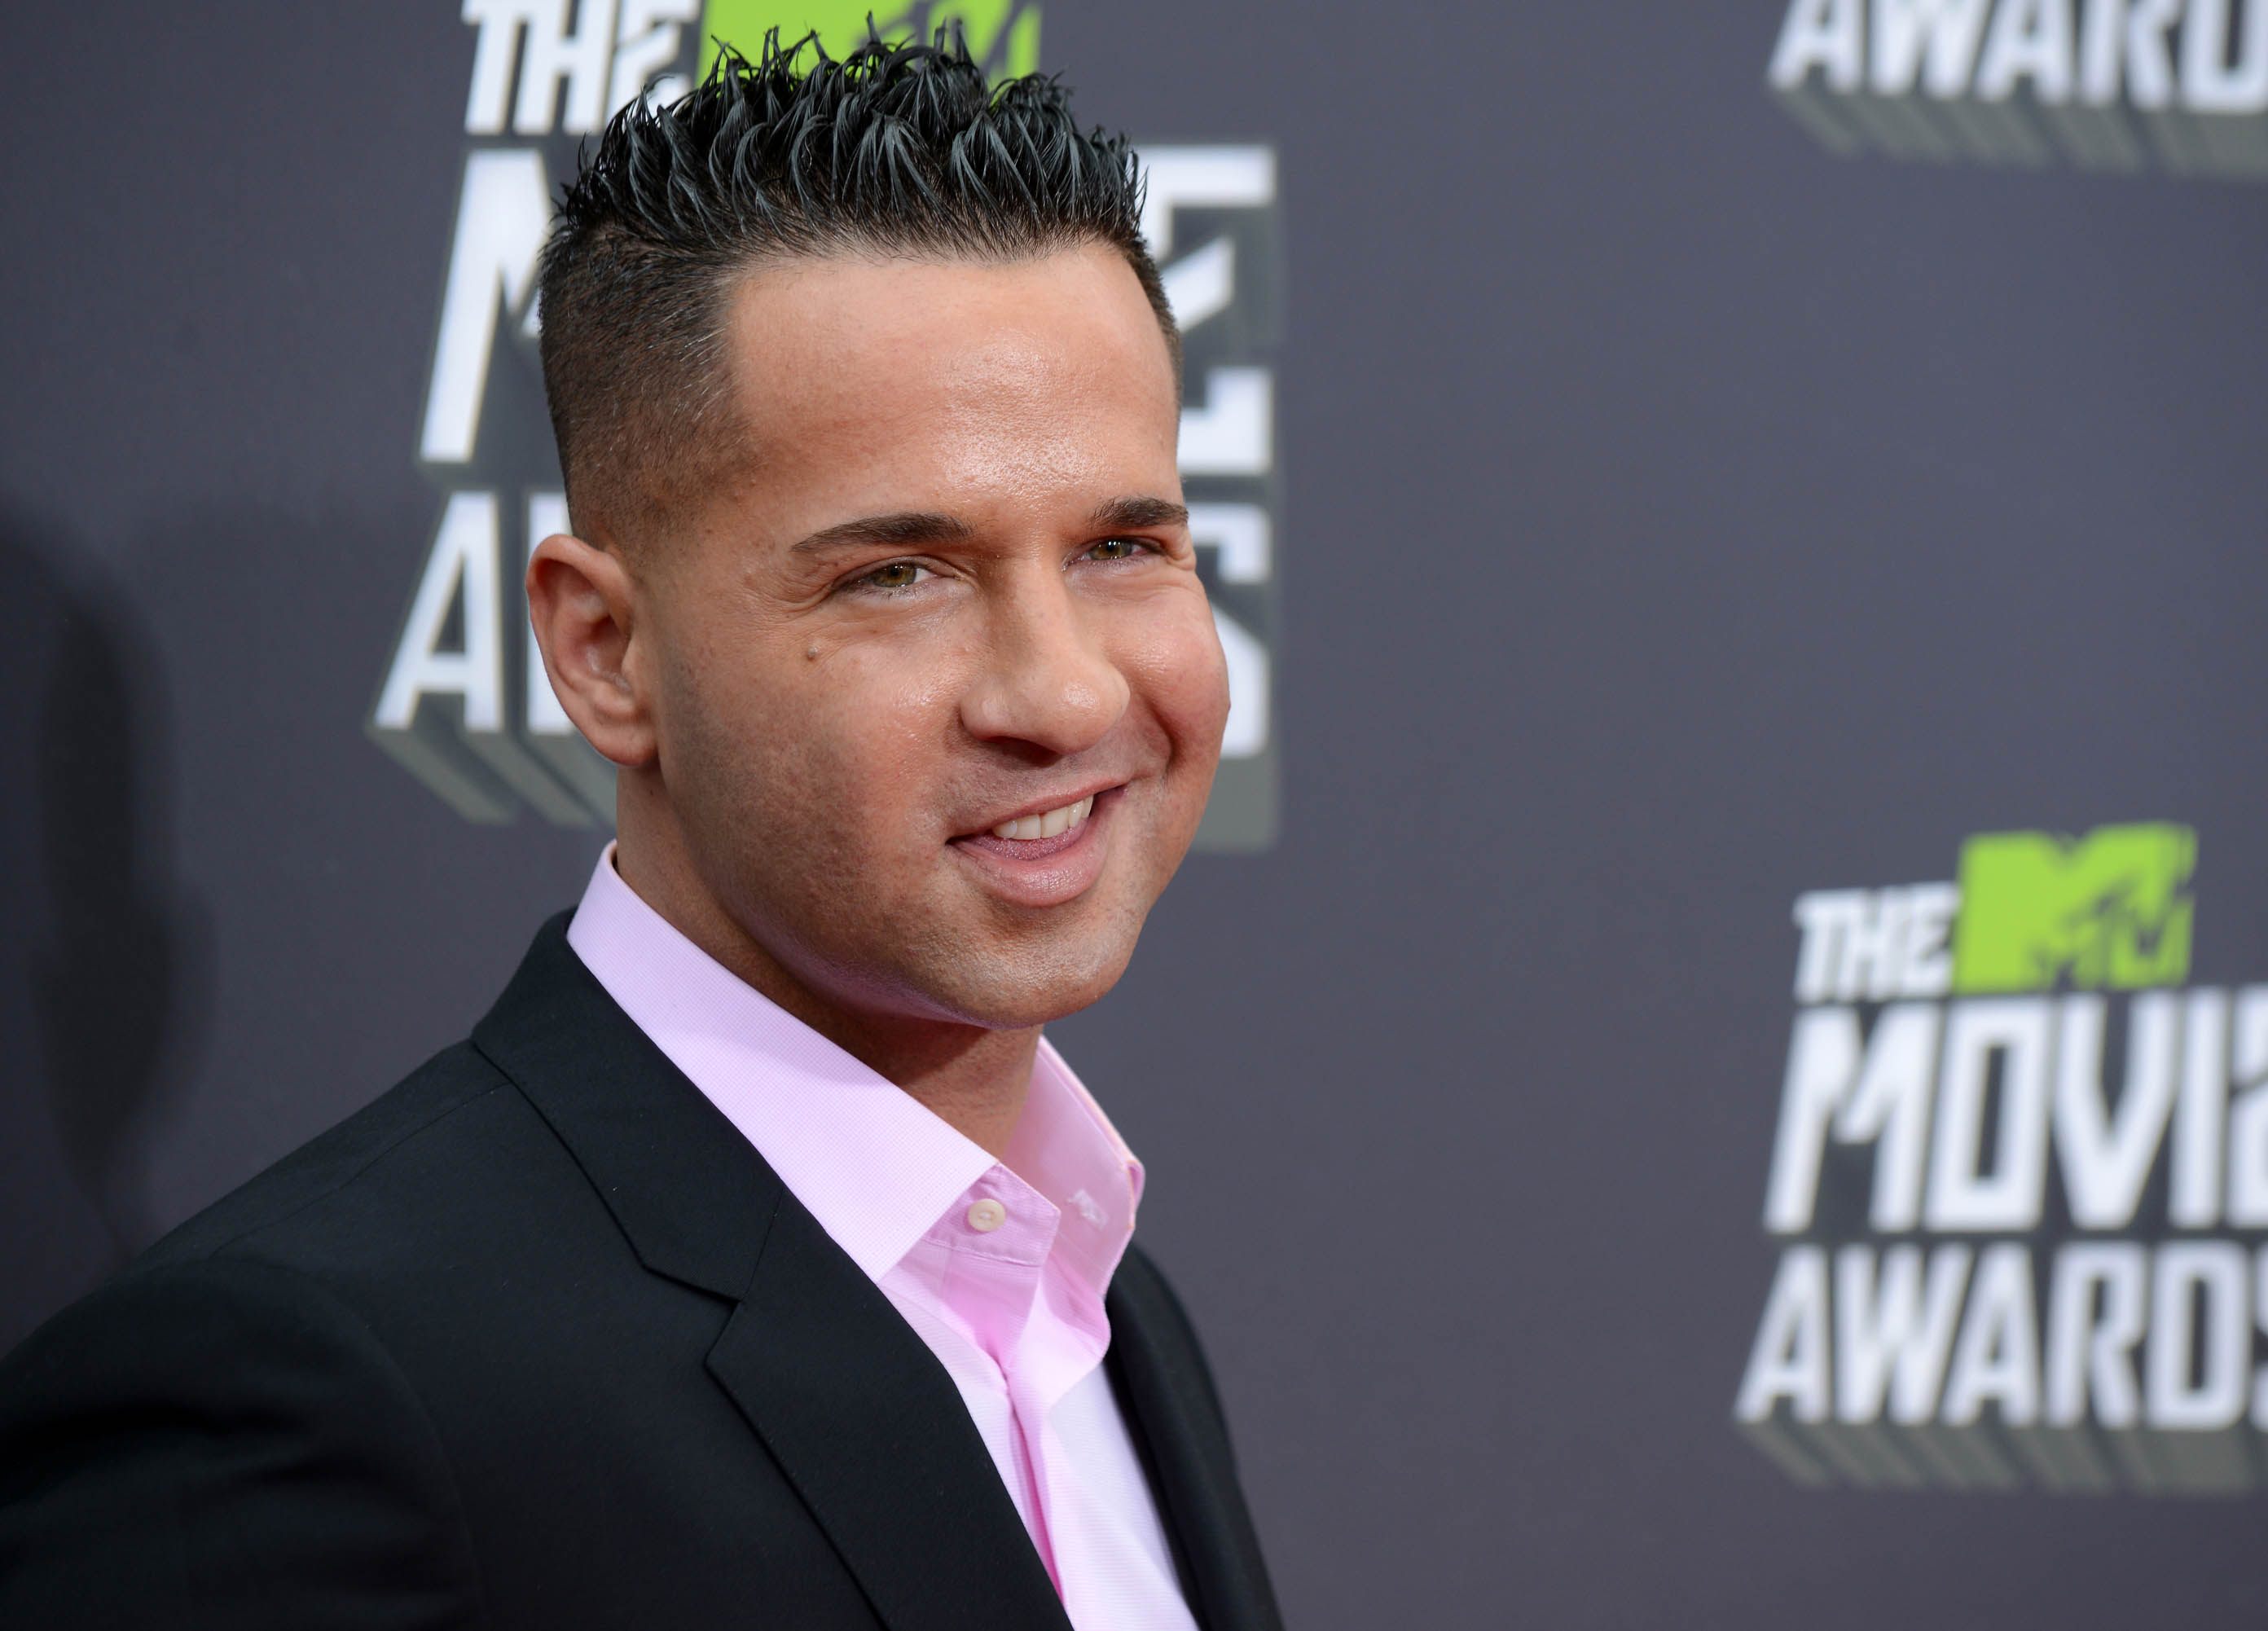 Mike Sorrentino, also known as The Situation, arrives at the MTV Movie Awards in Culver City, CA, on April 14, 2013. (Jordan Strauss—AP)